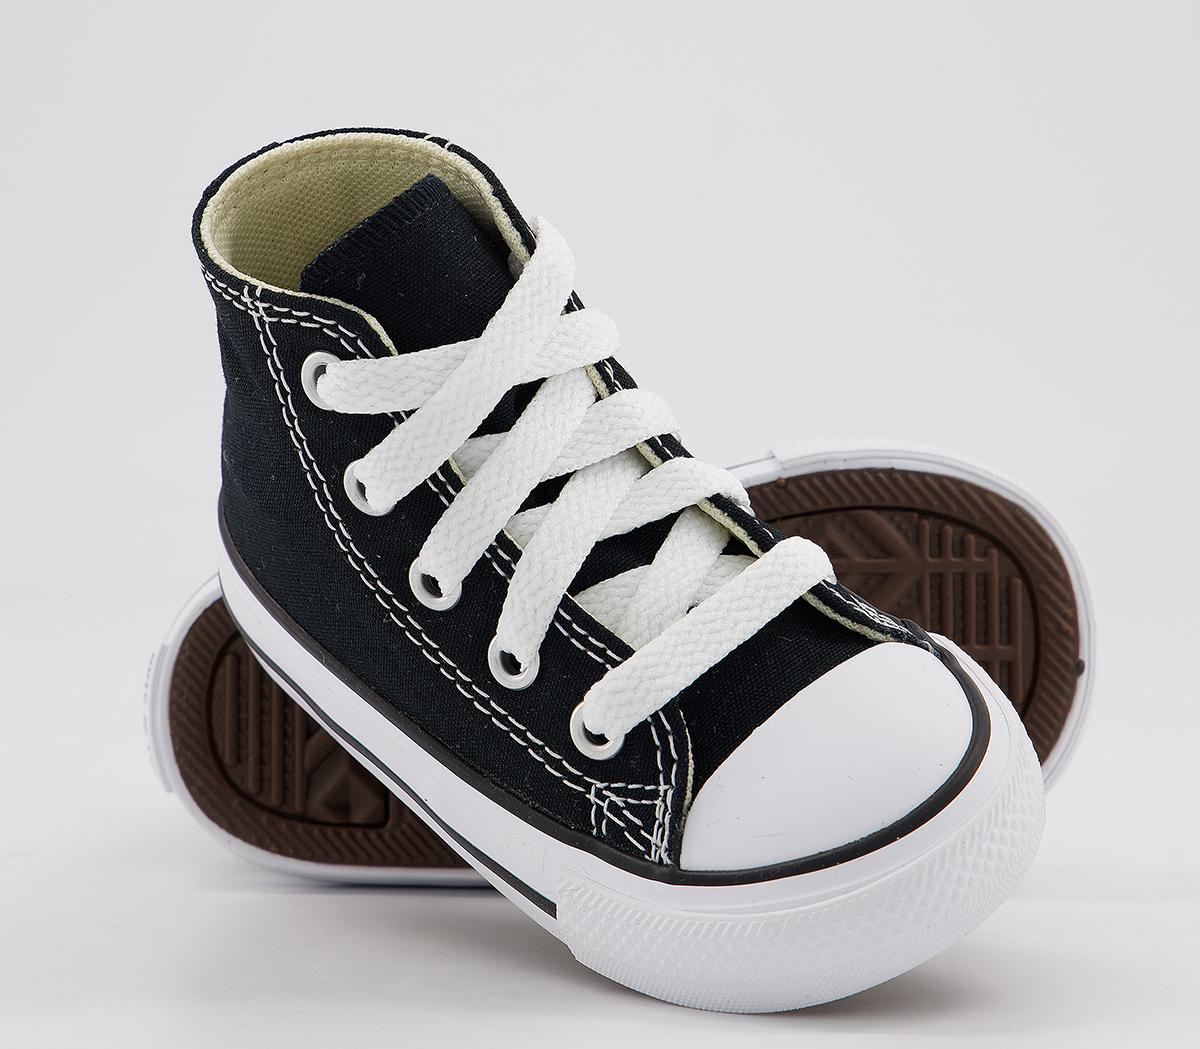 Converse All Star Hi Canvas Infant Trainers Black White - Unisex